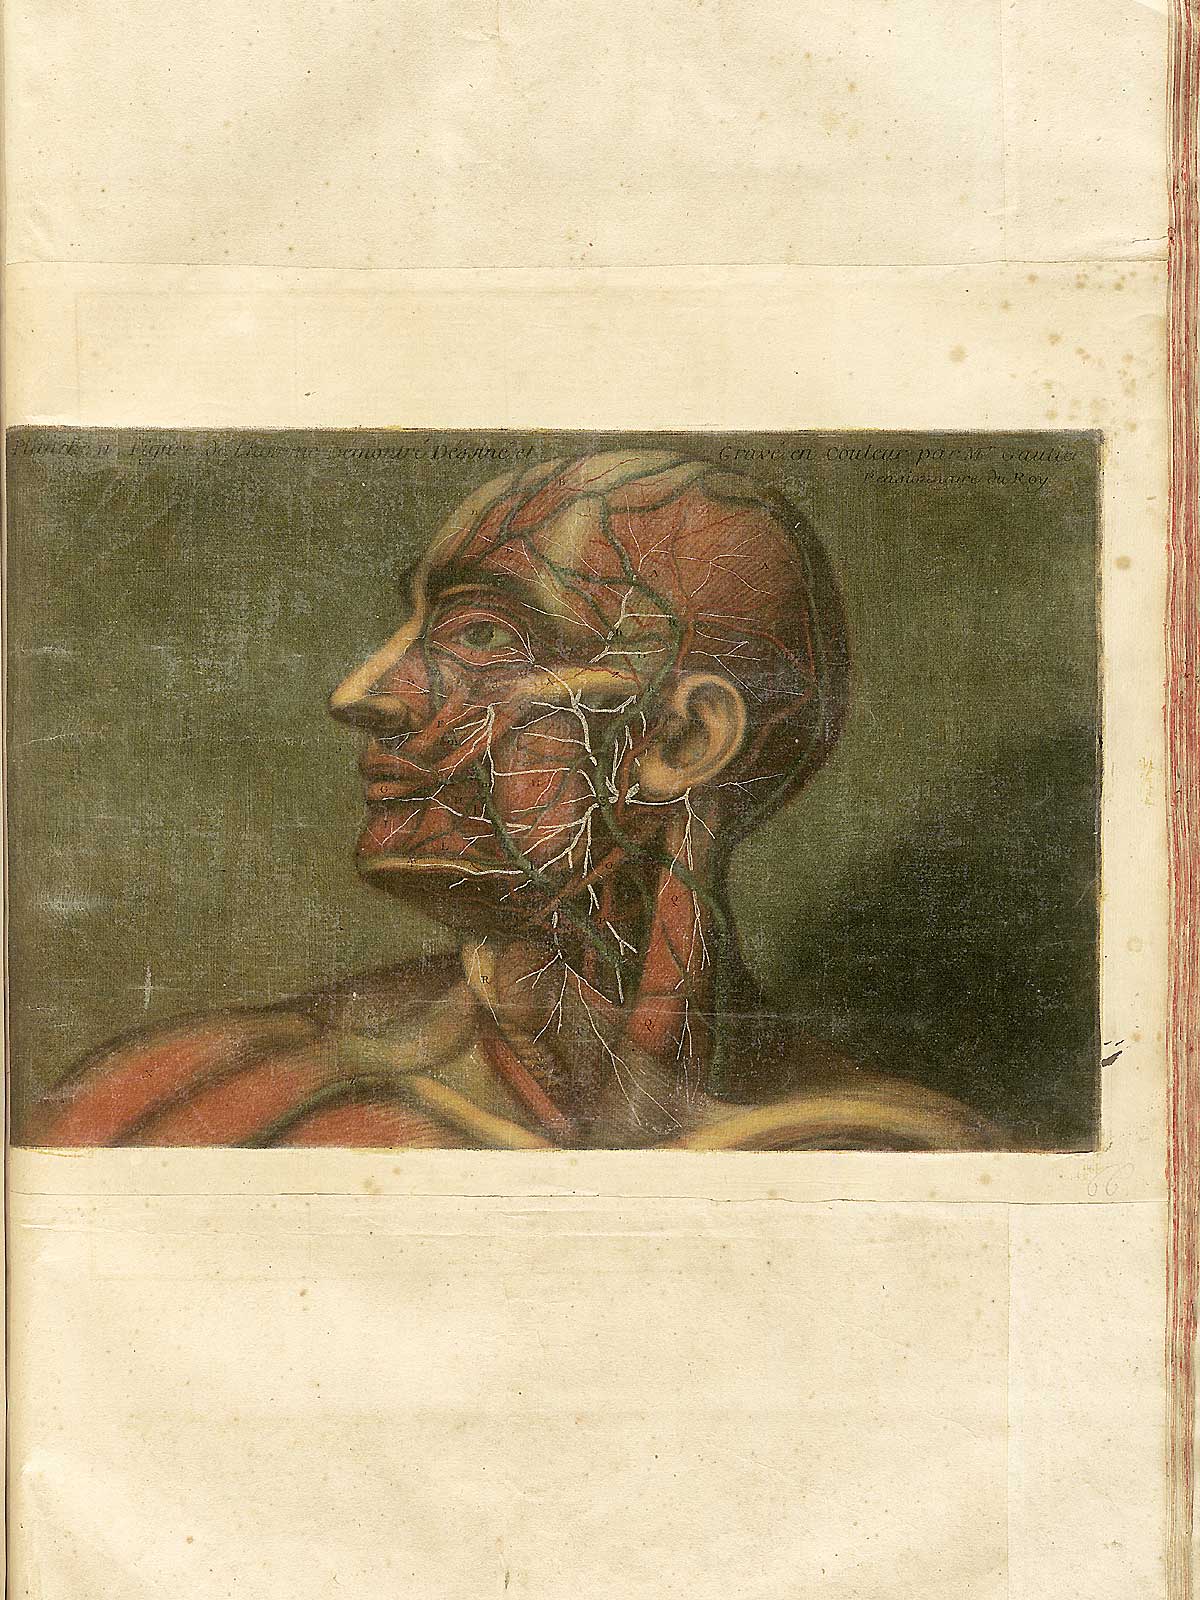 Color mezzotint of a man’s head in profile facing to the left with flesh removed to reveal the muscles, circulatory system, and nerves; from Jacques Fabian Gautier d’Agoty’s Anatomie générale des viscères en situation, NLM Call no.: WZ 260 G283c 1745.